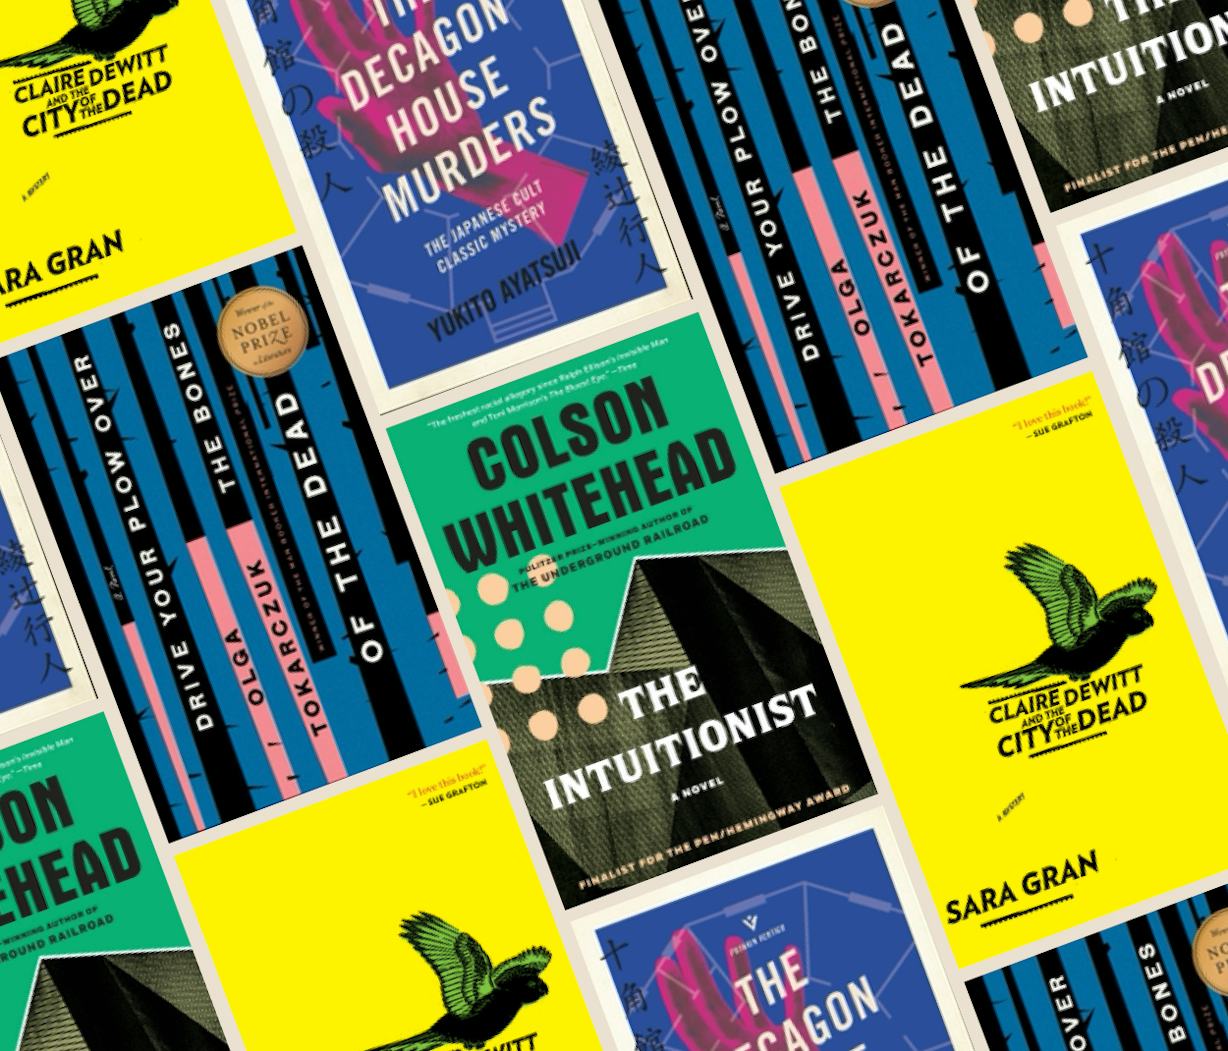 43 Best Mystery Books To Read In 2022, From Arthur Conan Doyle to Tana